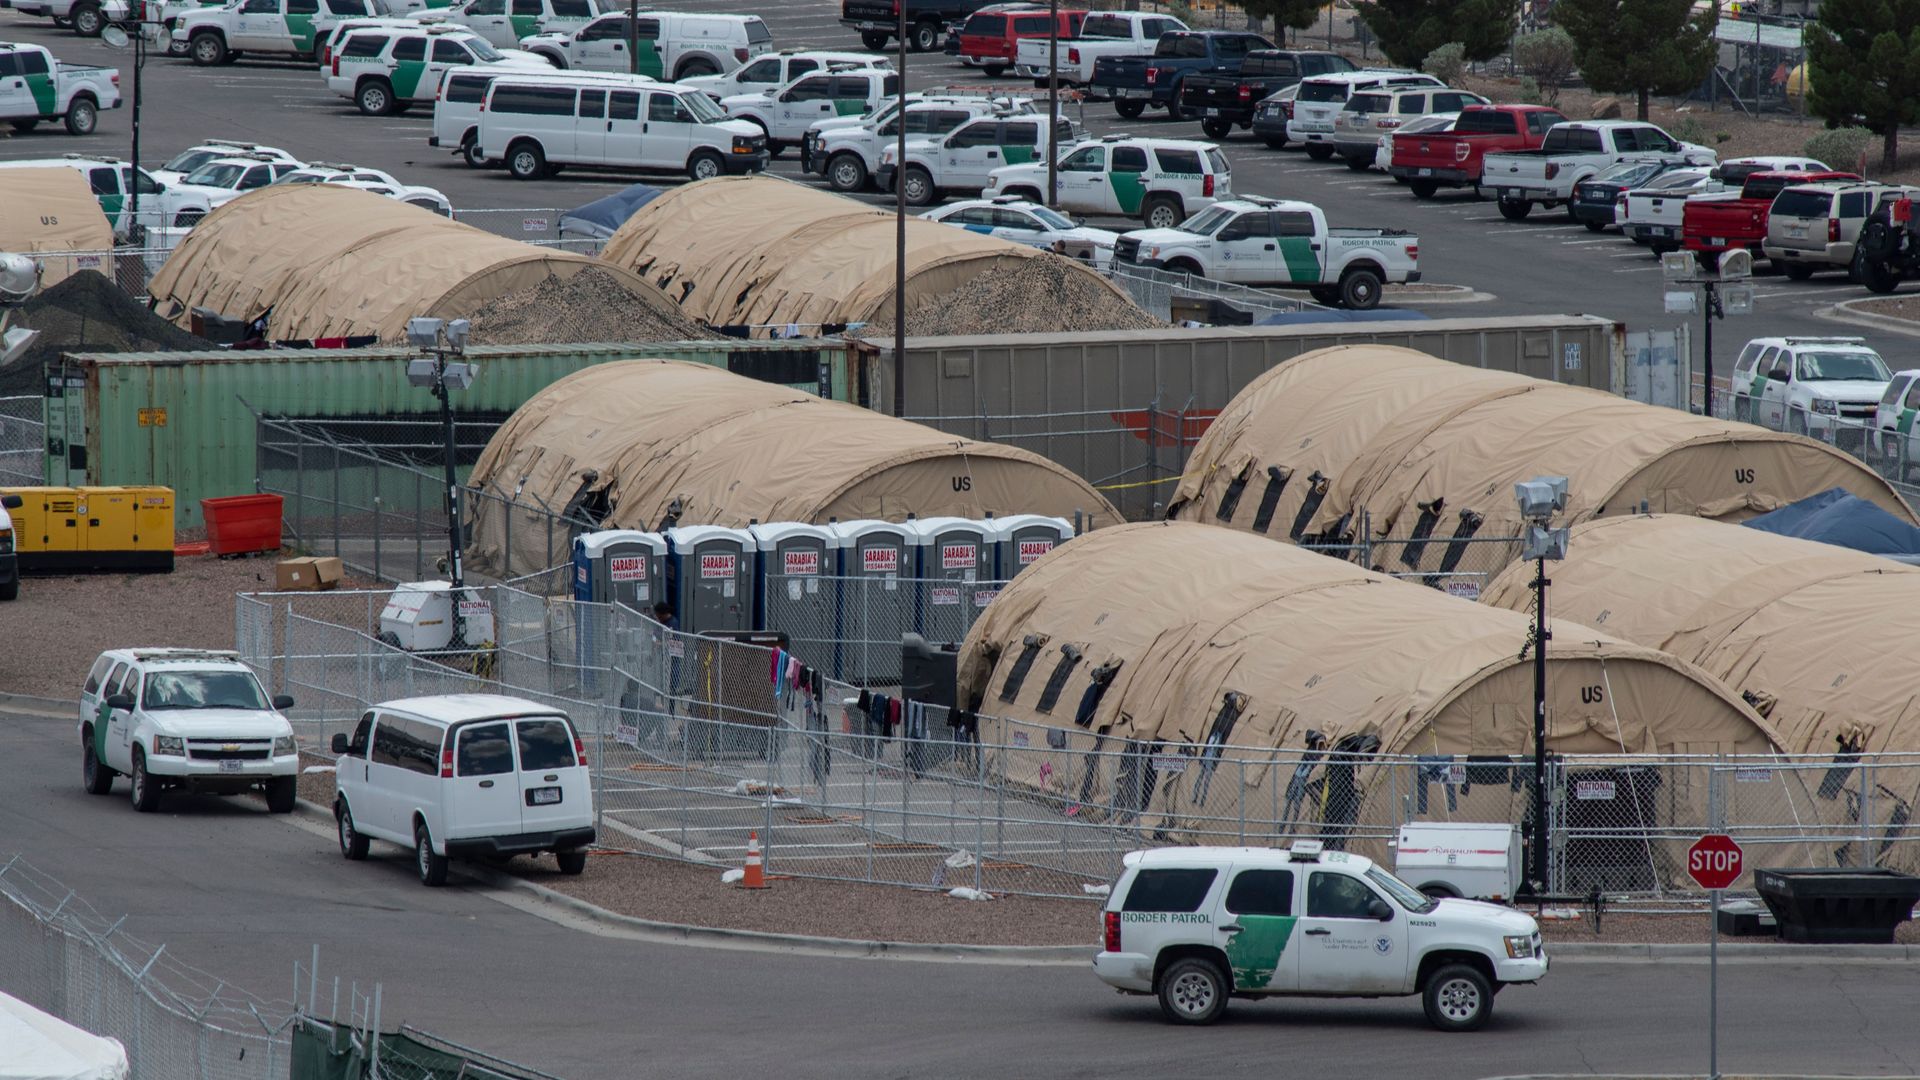 temporary holding facility for migrants